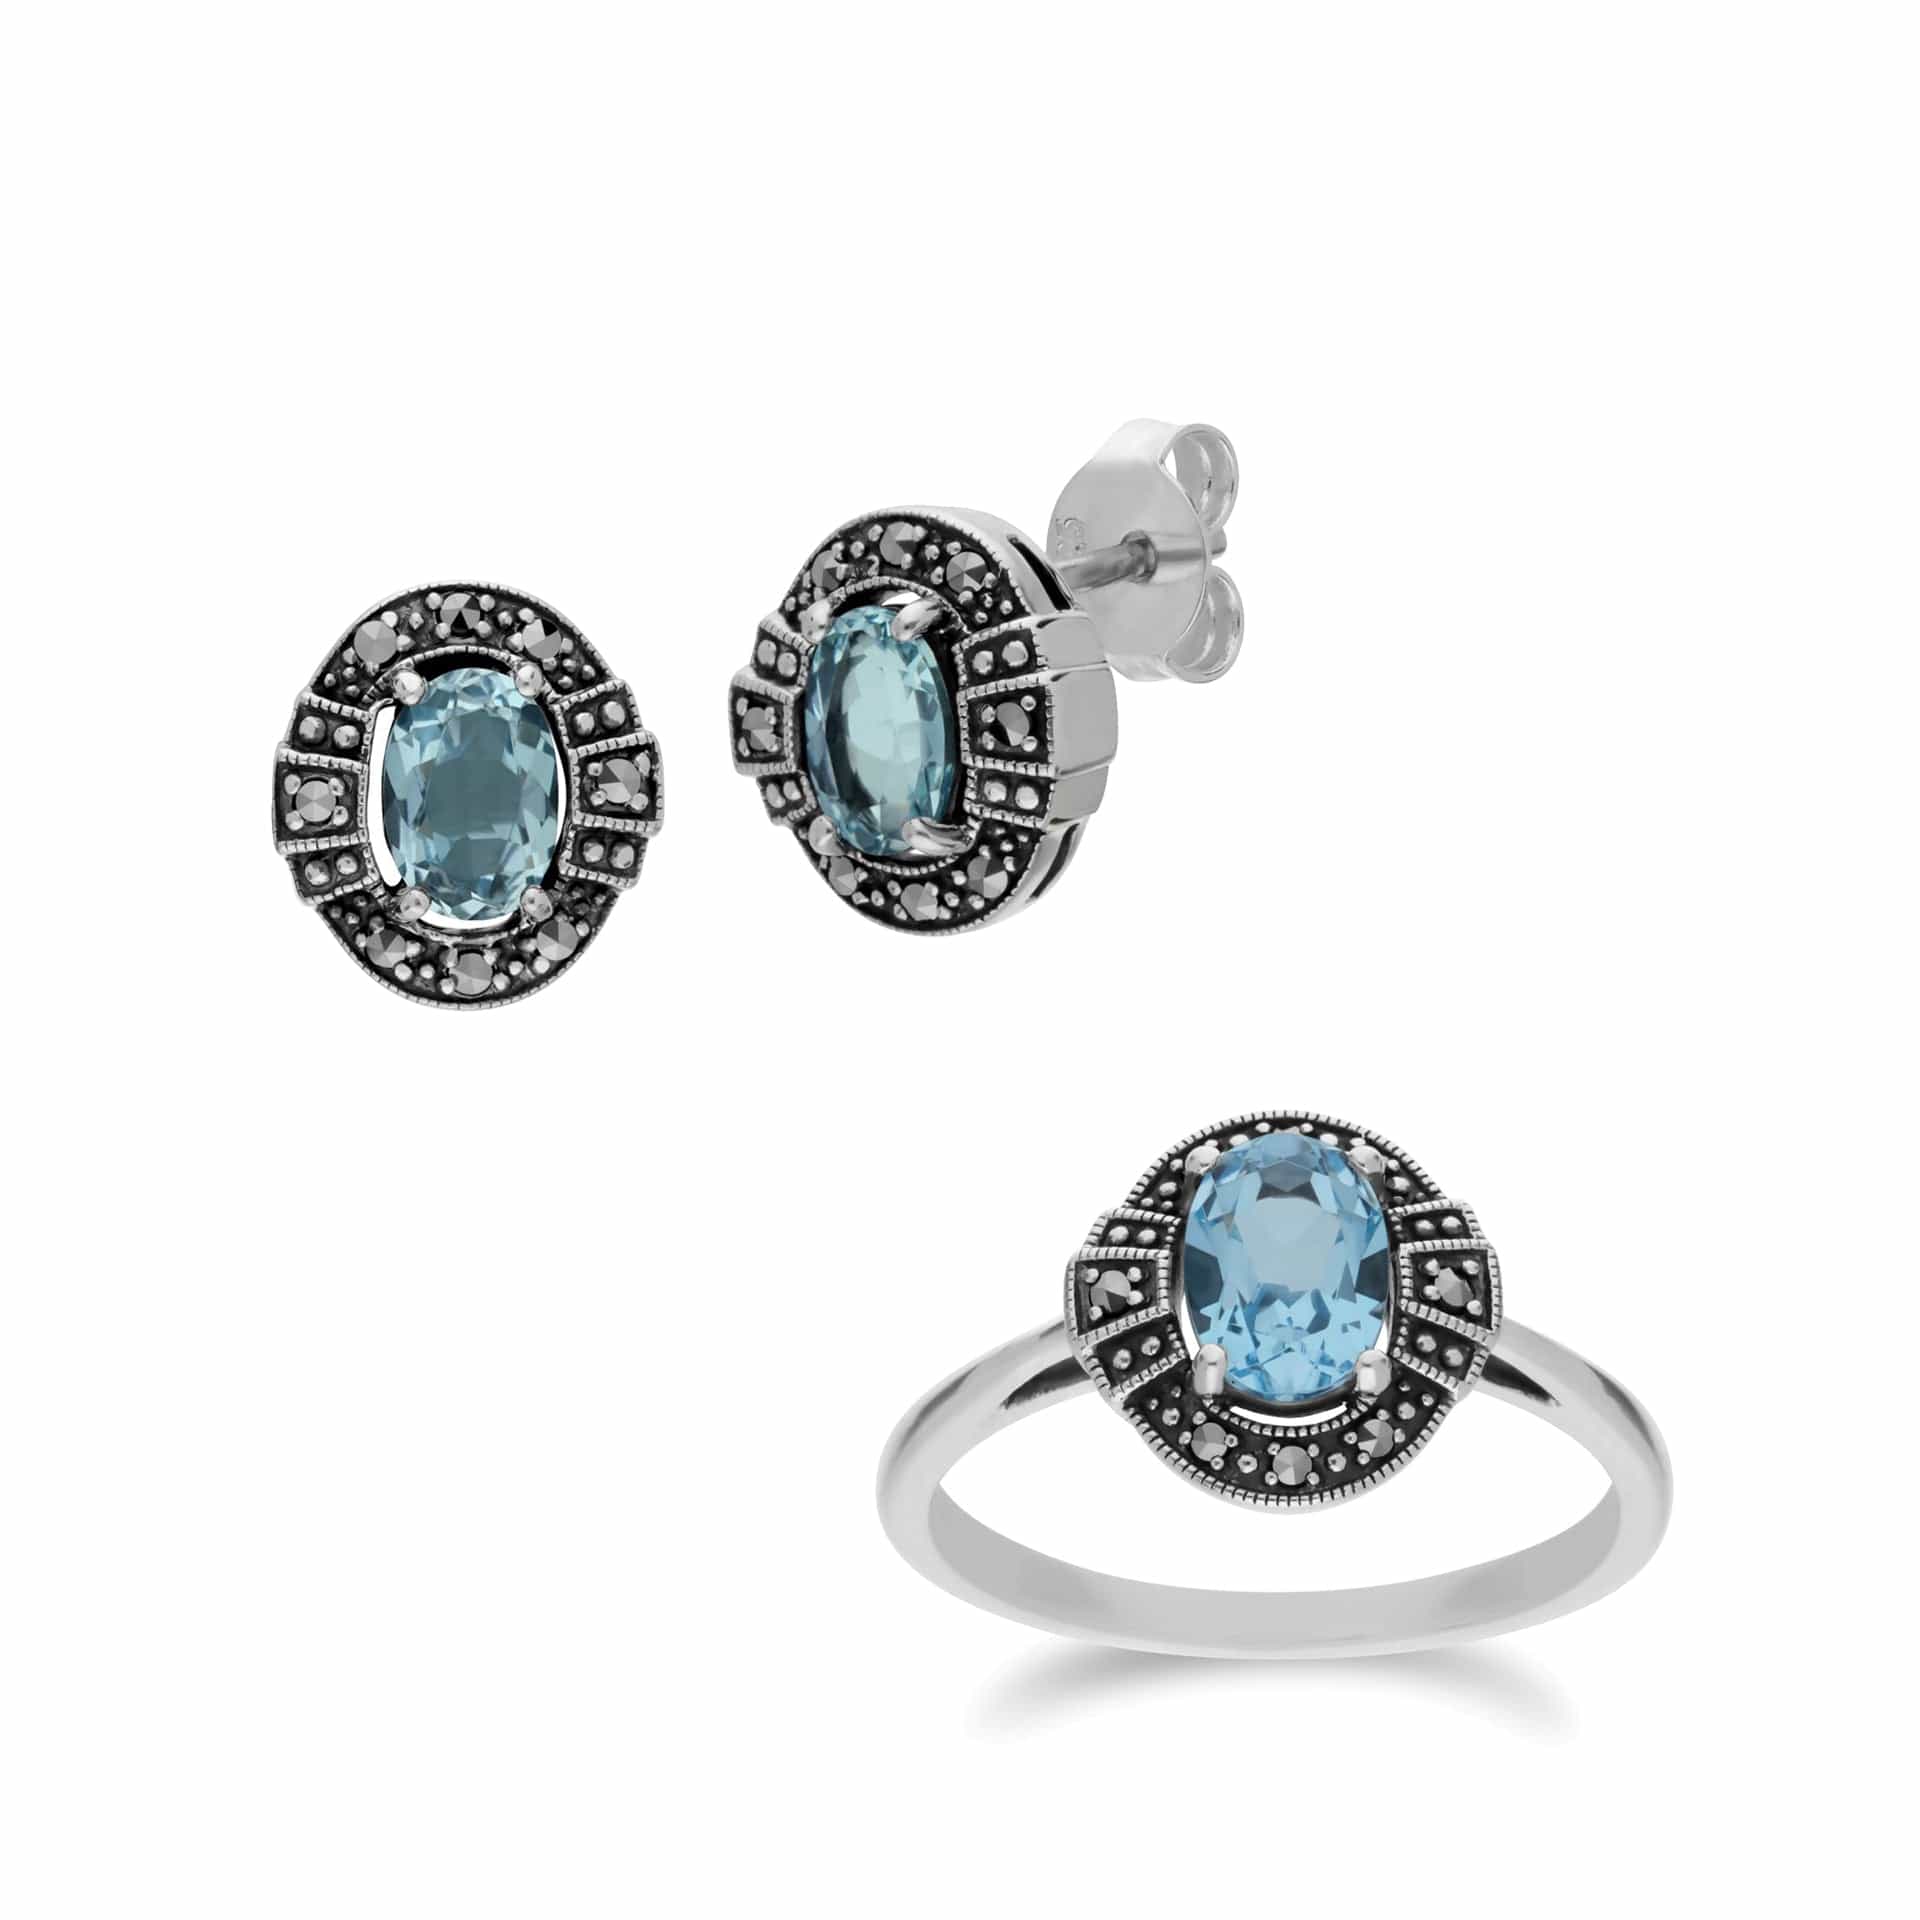 214E873001925-214R605701925 Art Deco Style Oval Blue Topaz and Marcasite Cluster Stud Earrings & Ring Set in 925 Sterling Silver 1